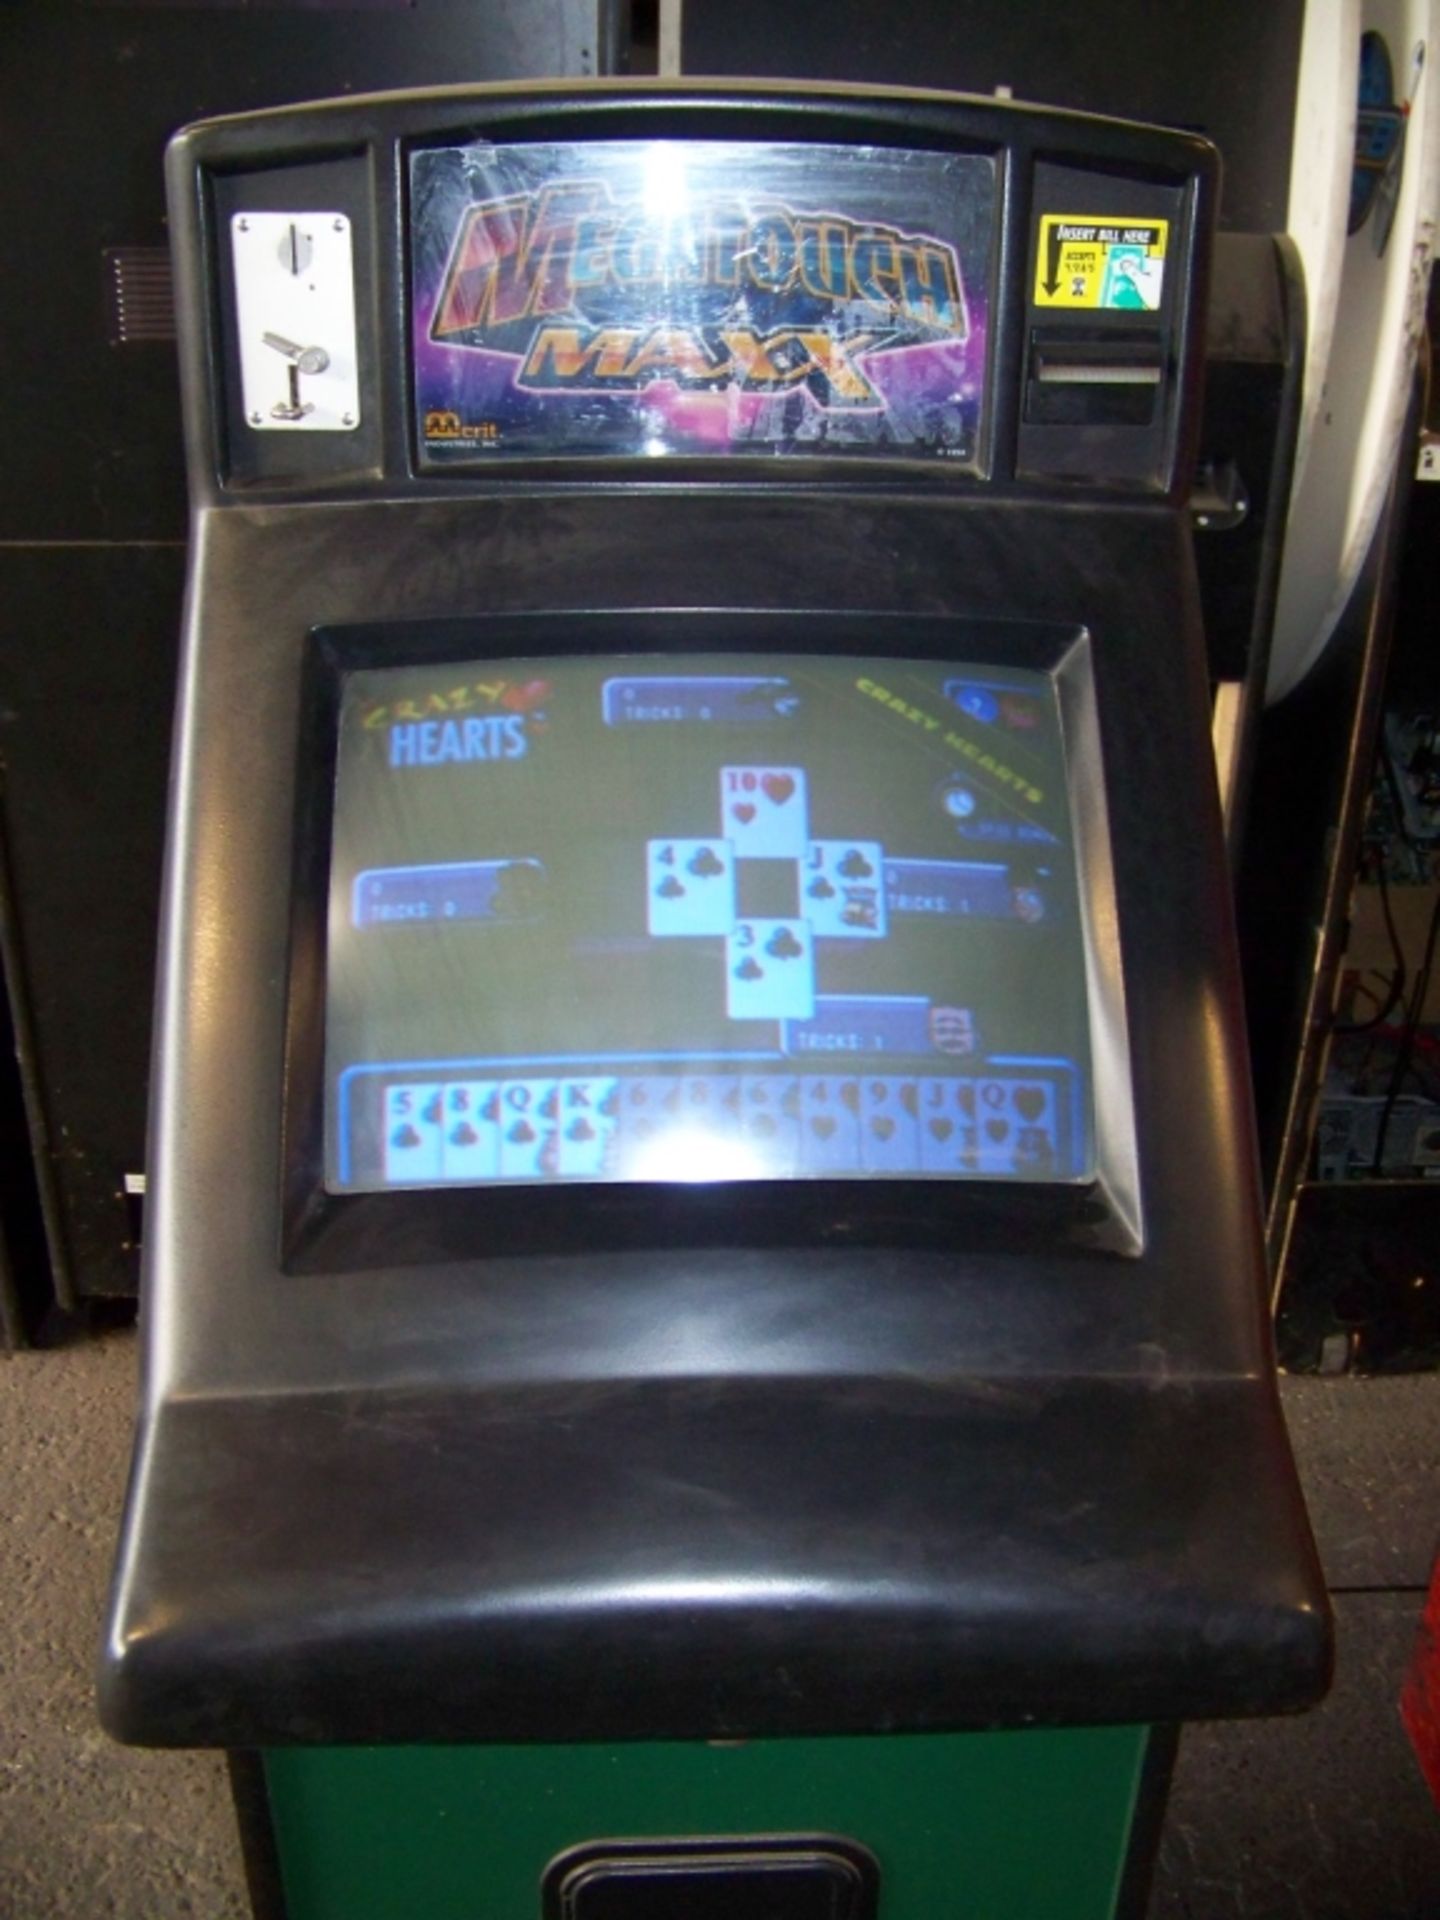 MEGATOUCH MAXX UPRIGHT ARCADE GAME